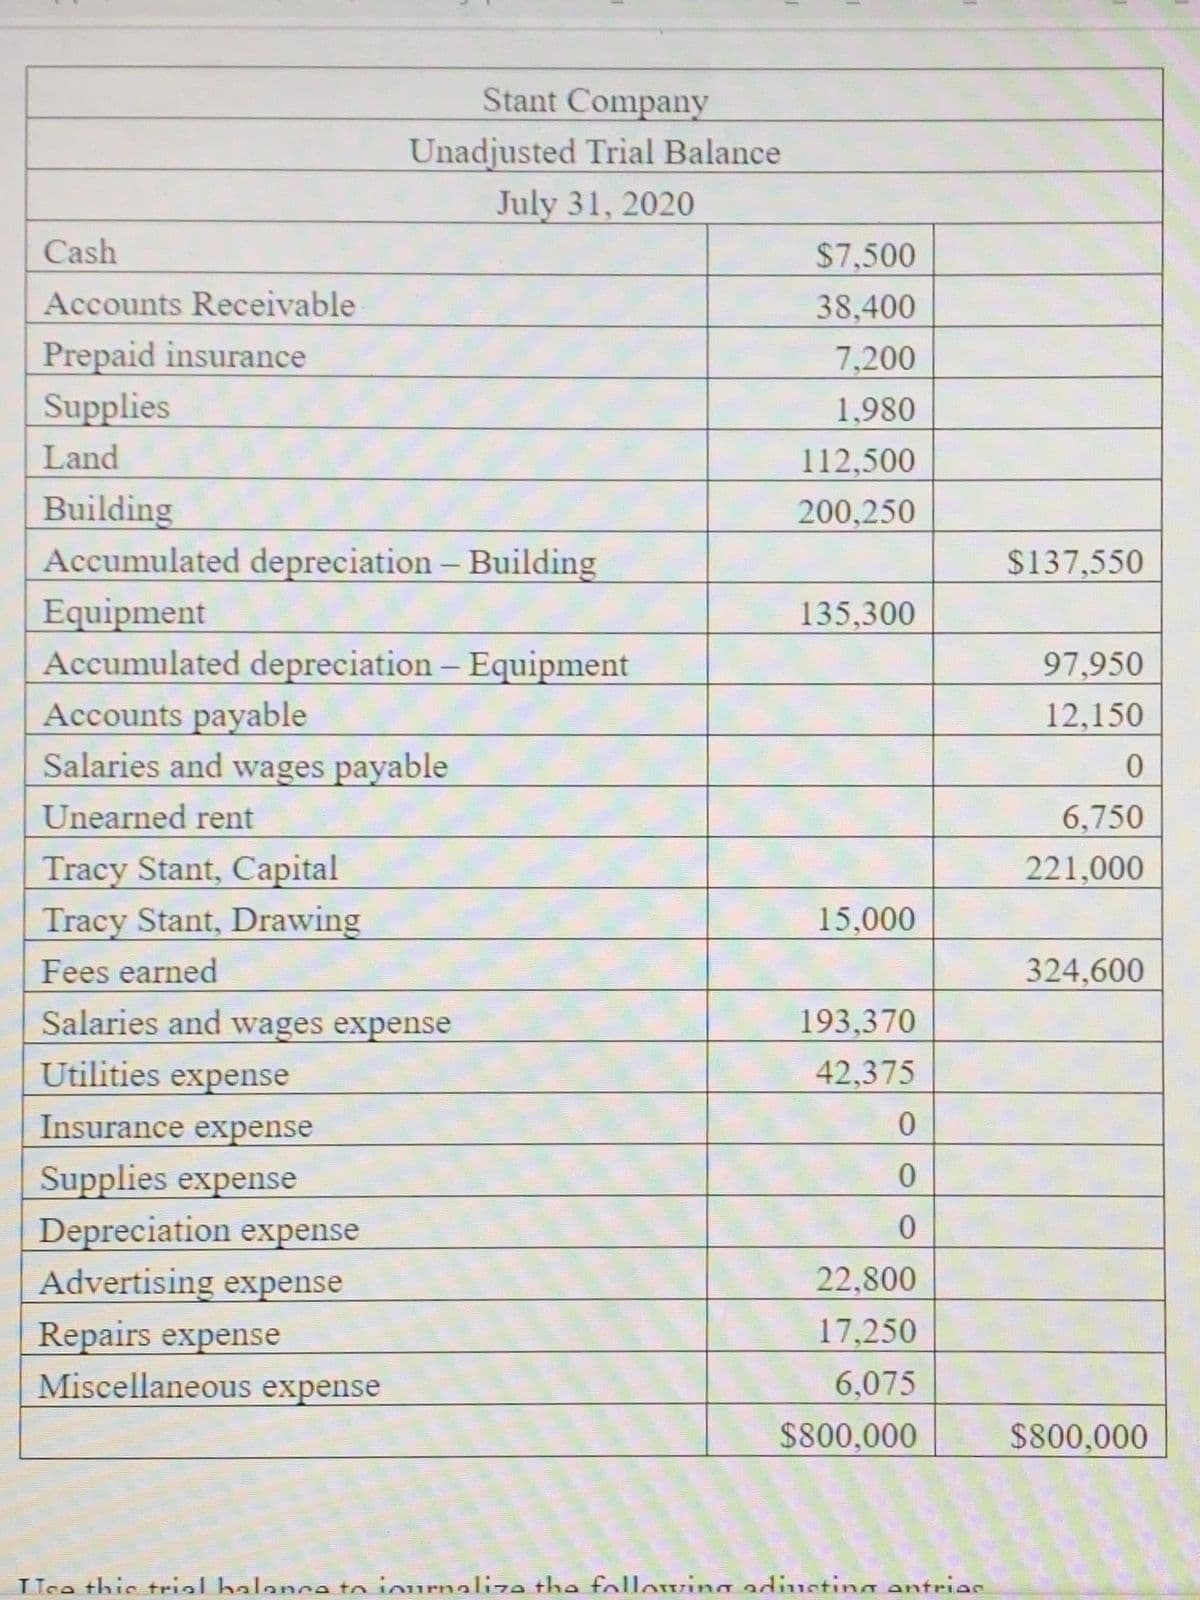 Stant Company
Unadjusted Trial Balance
July 31, 2020
Cash
$7,500
Accounts Receivable
38,400
Prepaid insurance
7,200
Supplies
1,980
Land
112,500
Building
Accumulated depreciation – Building
200,250
$137,550
Equipment
Accumulated depreciation - Equipment
Accounts payable
Salaries and wages payable
135,300
97,950
12,150
Unearned rent
6,750
Tracy Stant, Capital
Tracy Stant, Drawing
221,000
15,000
Fees earned
324,600
Salaries and wages expense
193,370
Utilities expense
42,375
Insurance expense
Supplies expense
Depreciation expense
Advertising expense
22,800
Repairs expense
Miscellaneous expense
17,250
6,075
$800,000
$800,000
Uce thic trial balanca to iournaliza the following adiuuctina entries
